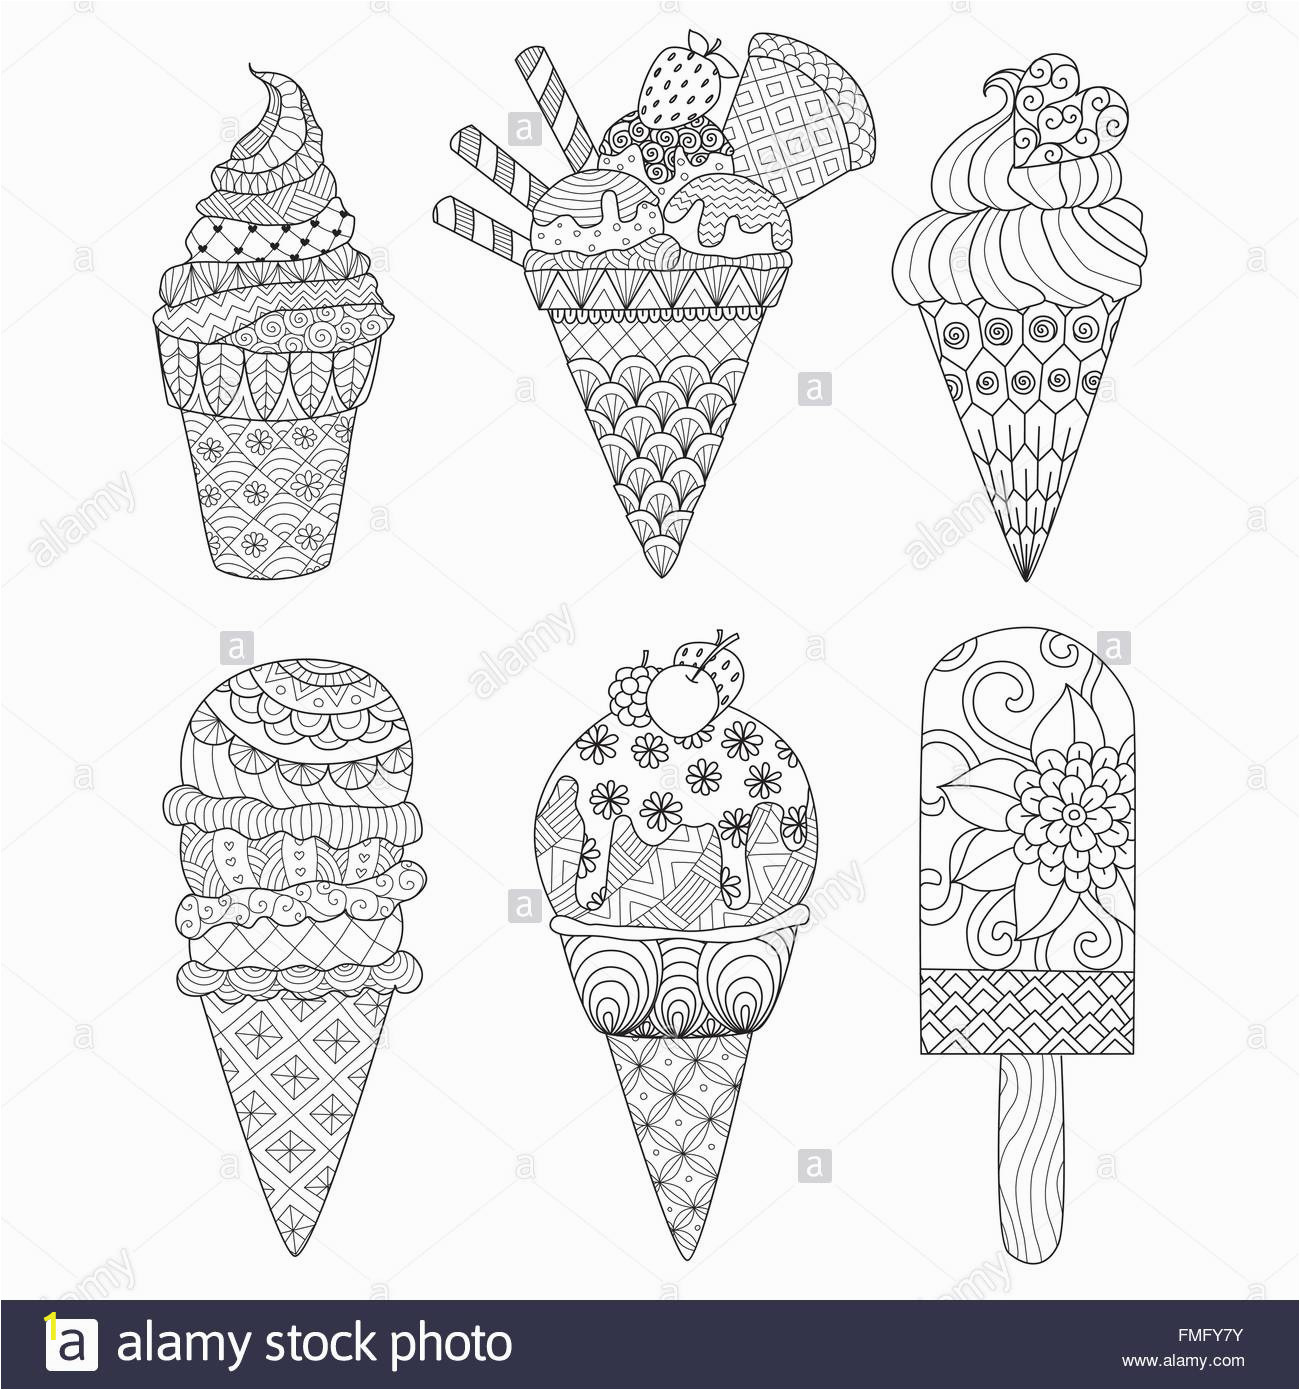 Printable Coloring Pages Ice Cream Zentangle Ice Cream Set for Coloring Book for Adult and